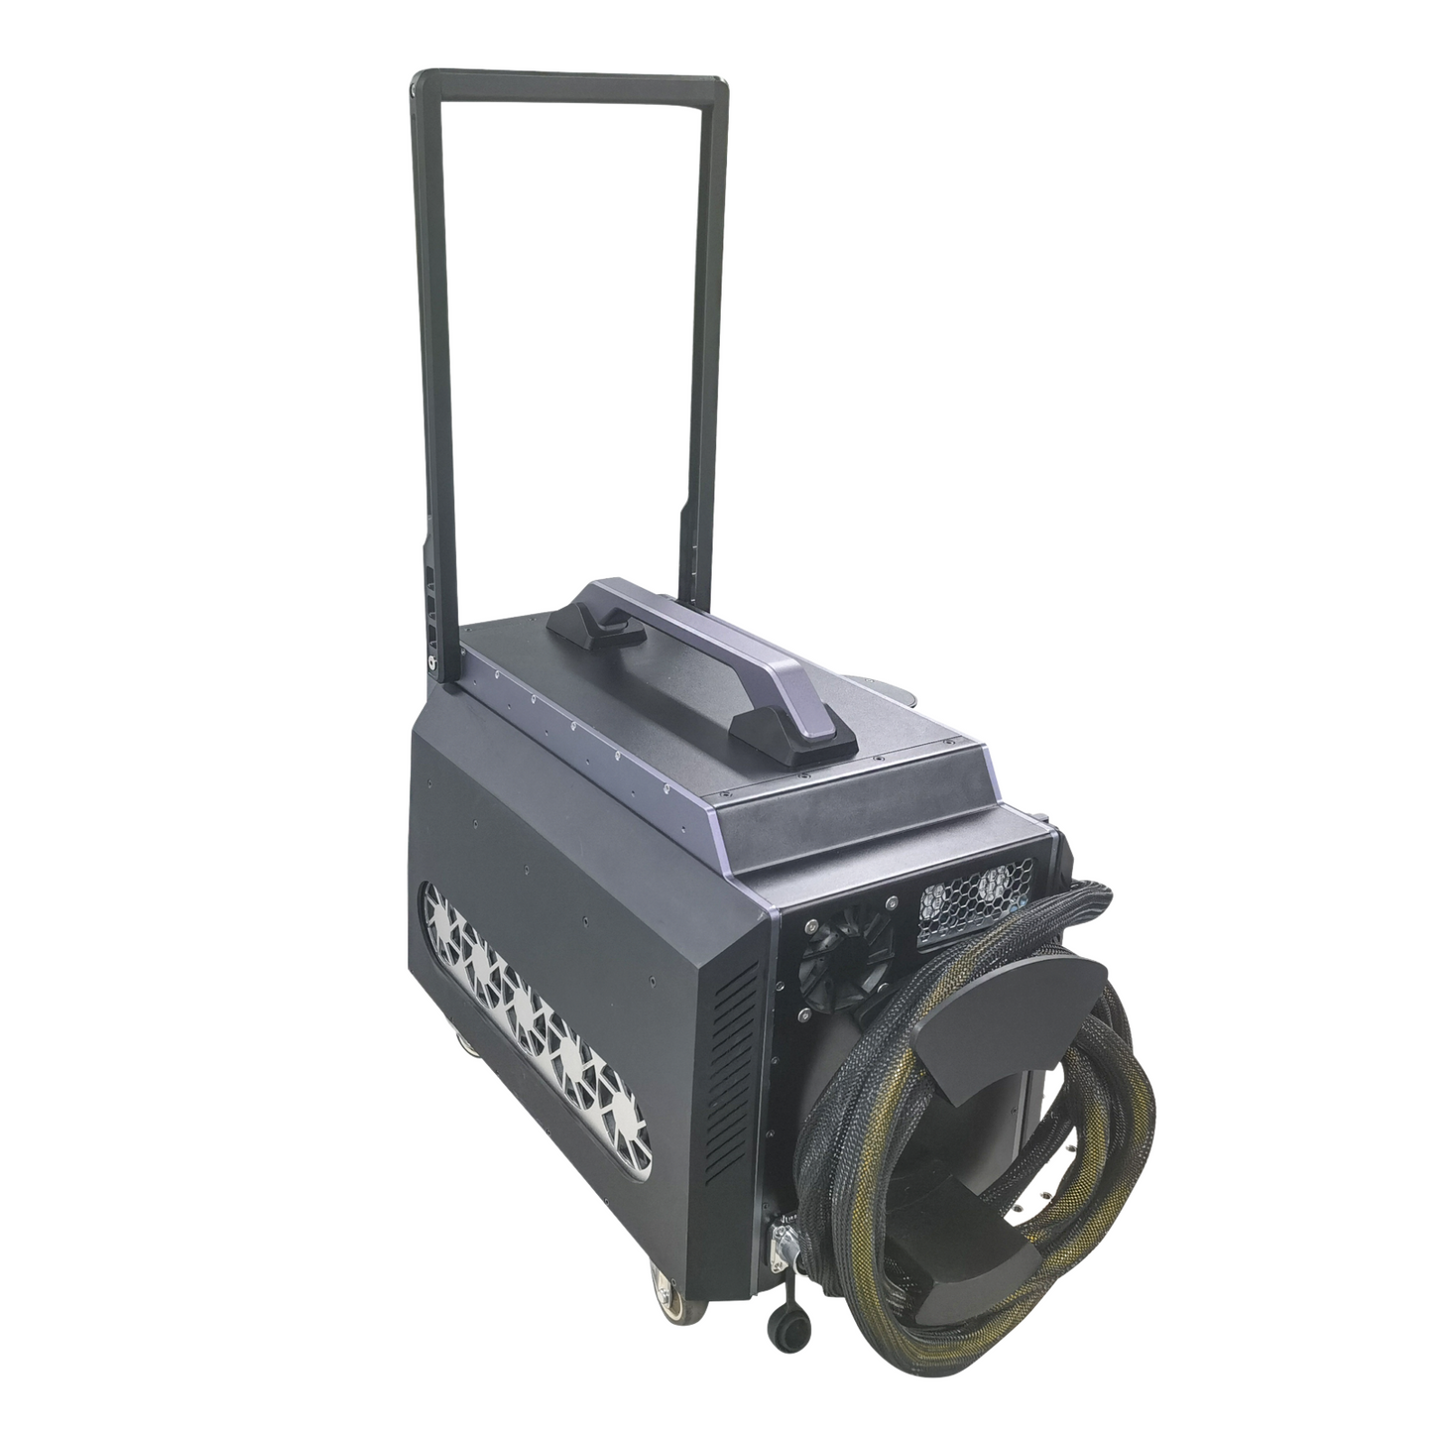 MCWlaser 200W Laser Rust Removal Machine Handheld Pulse Laser Cleaning Machine Trolley Type